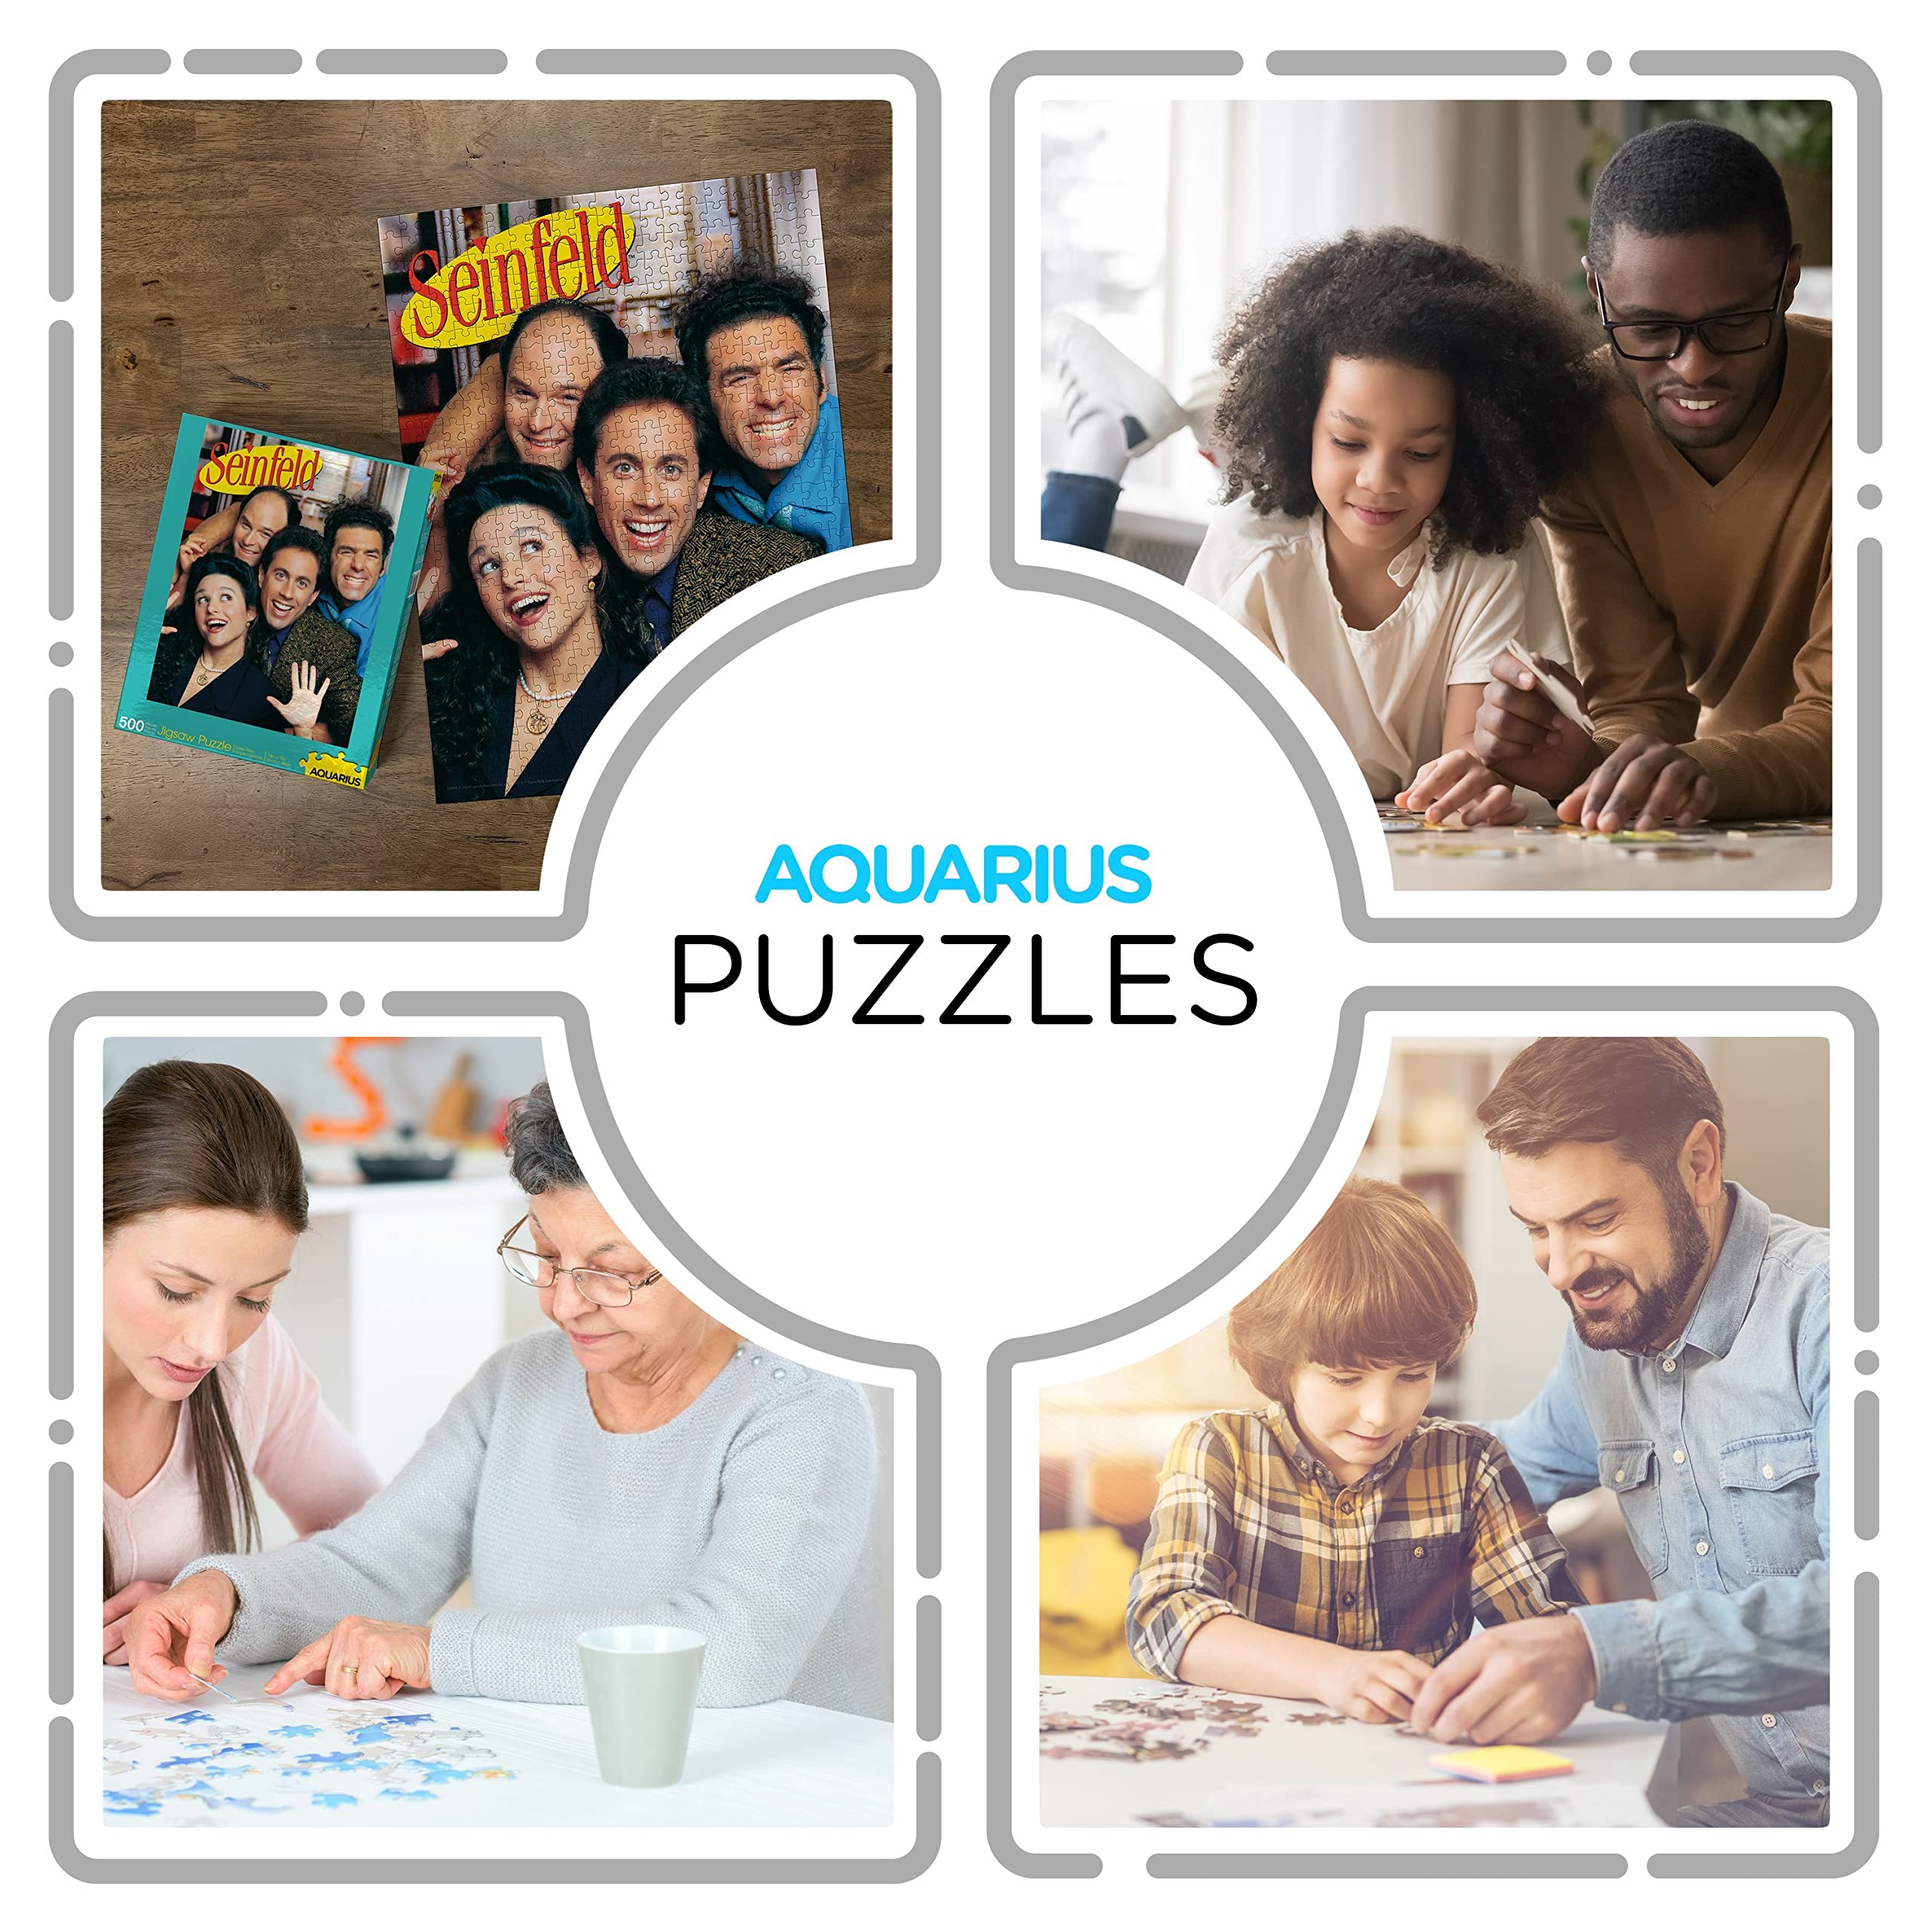 AQUARIUS Seinfeld Group Puzzle (500 Piece Jigsaw Puzzle) - Glare Free - Precision Fit - Officially Licensed Seinfeld Merchandise & Collectibles - 14 x 19 Inches